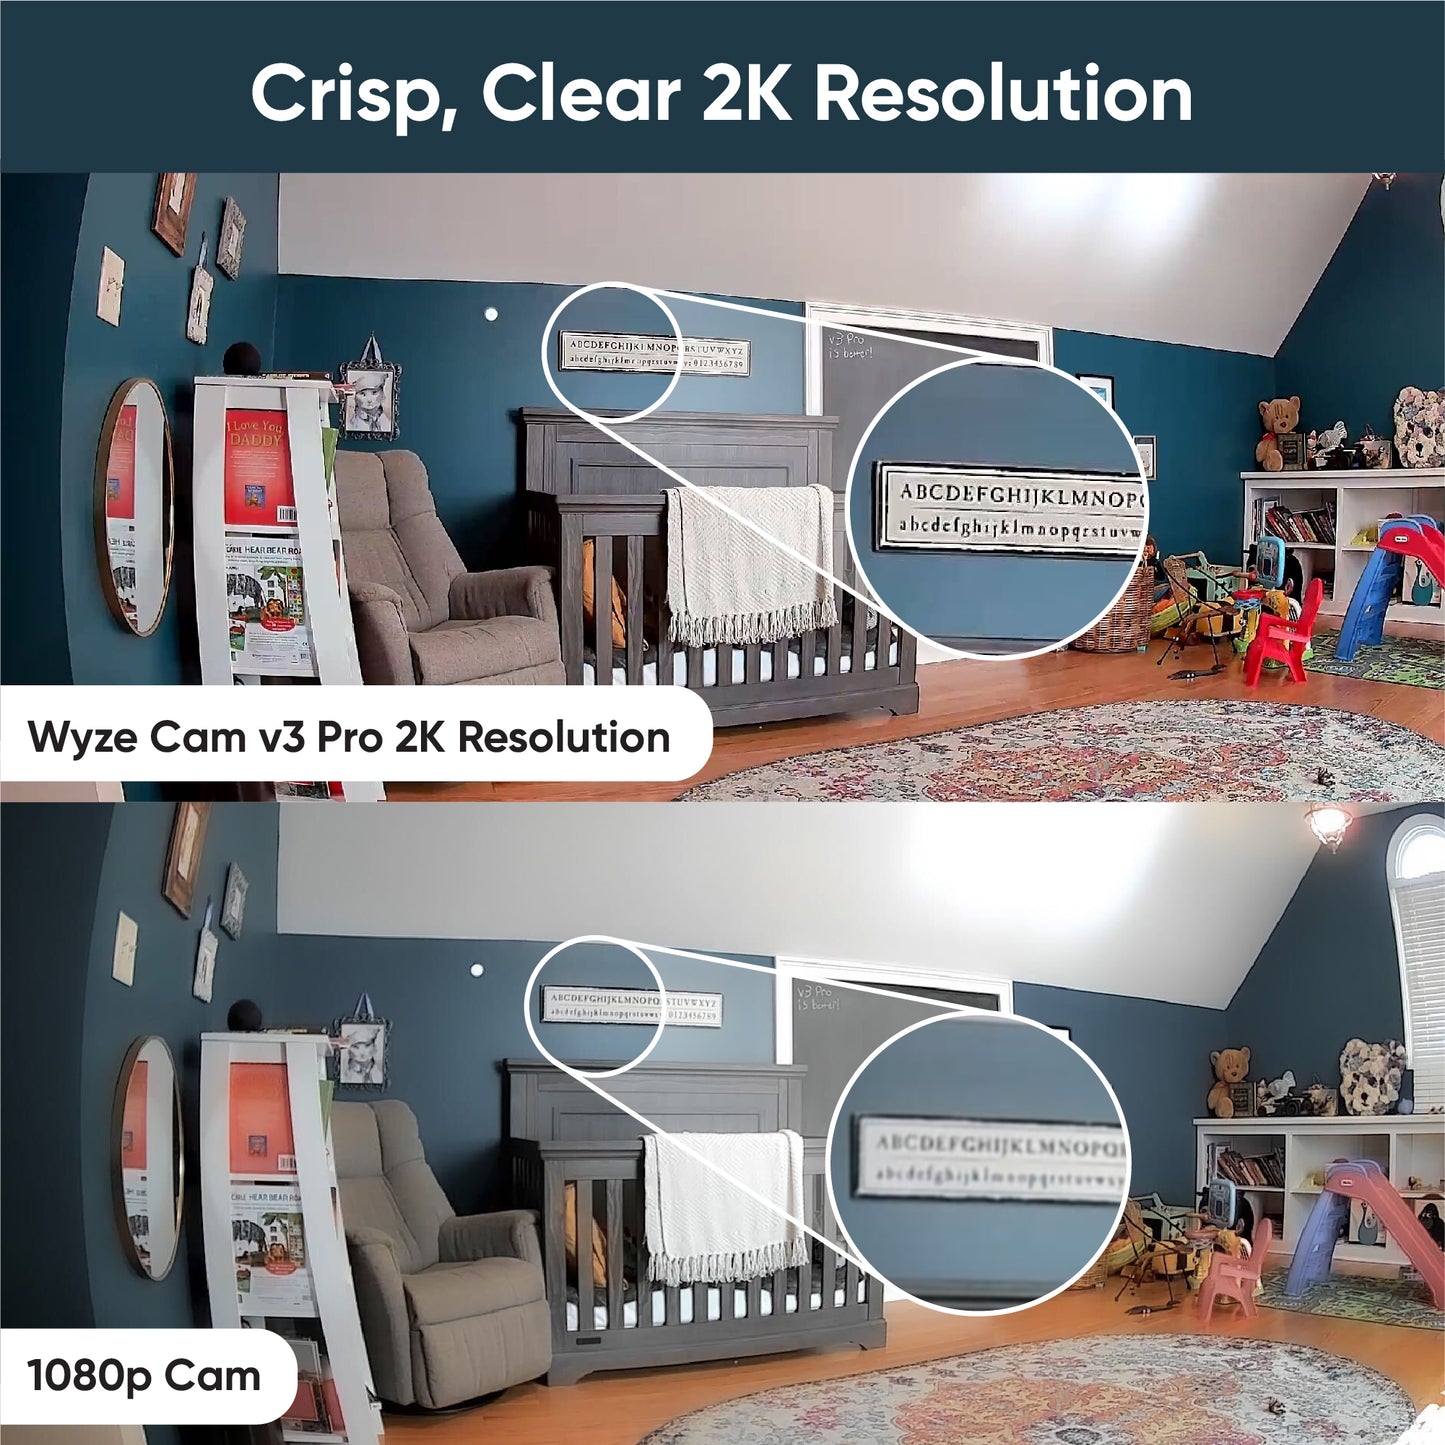 Comparison image of Wyze Cam v3 Pro with a much clearer image of an alphabet. Text overlay "Crisp, Clear 2K Resolution."